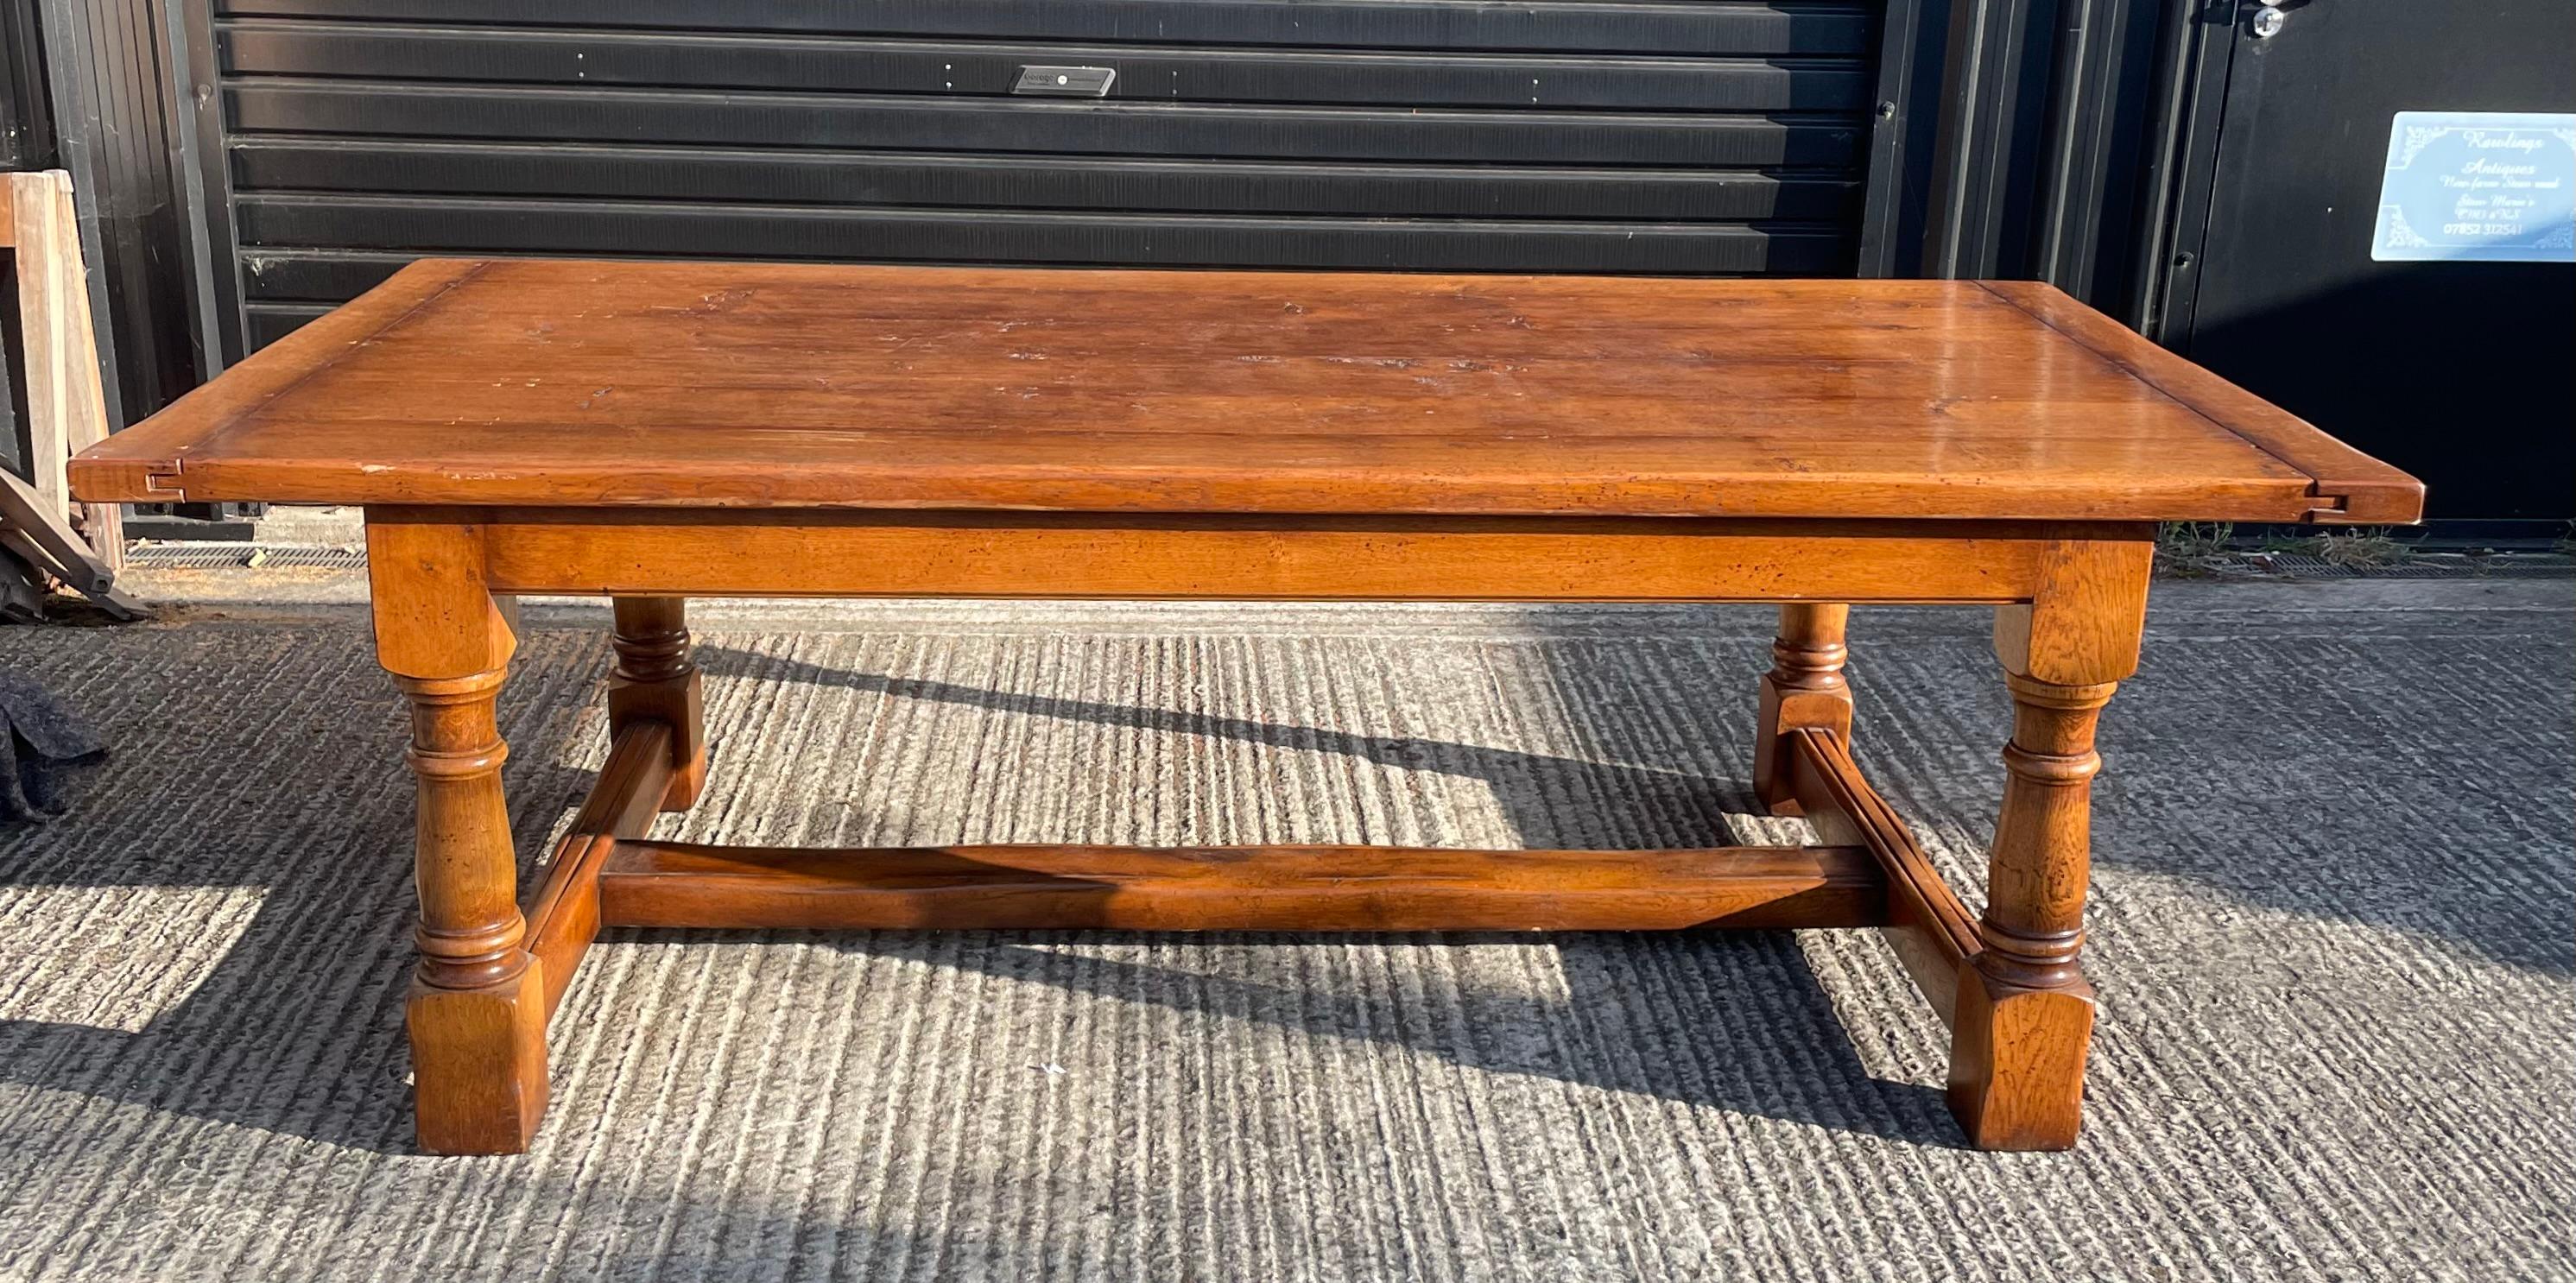 Very good quality large vintage solid English oak farm house refectory table .
The table has a 6 plank solid oak top that has been traditionally peg jointed and is 1 3/4 inches thick 90 inches long and 47 inches wide that will seat 8 people with